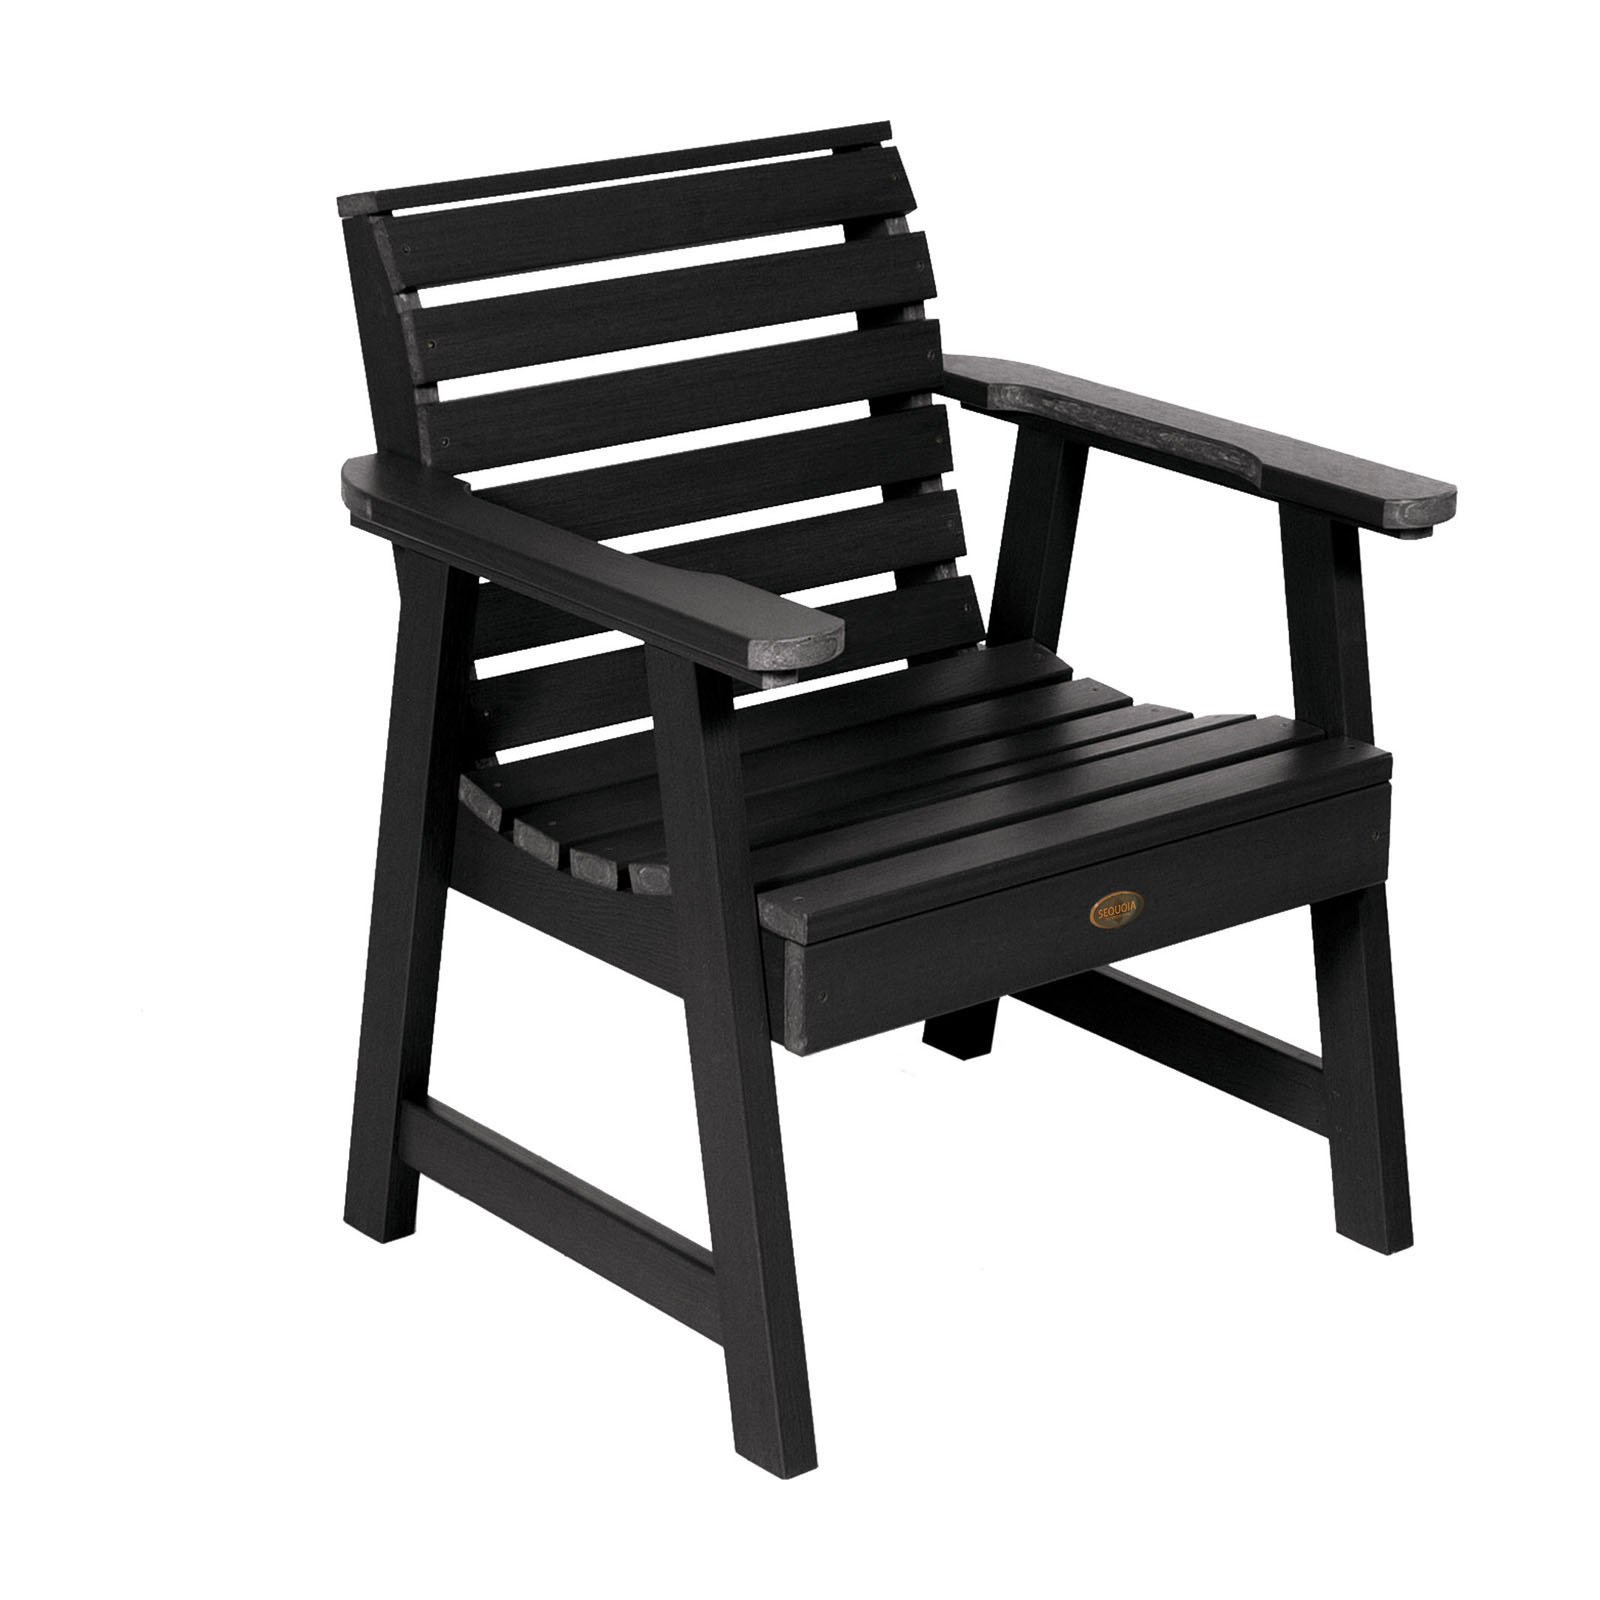 The Sequoia Professional Commercial Grade Glennville Lounge Chair - image 1 of 2